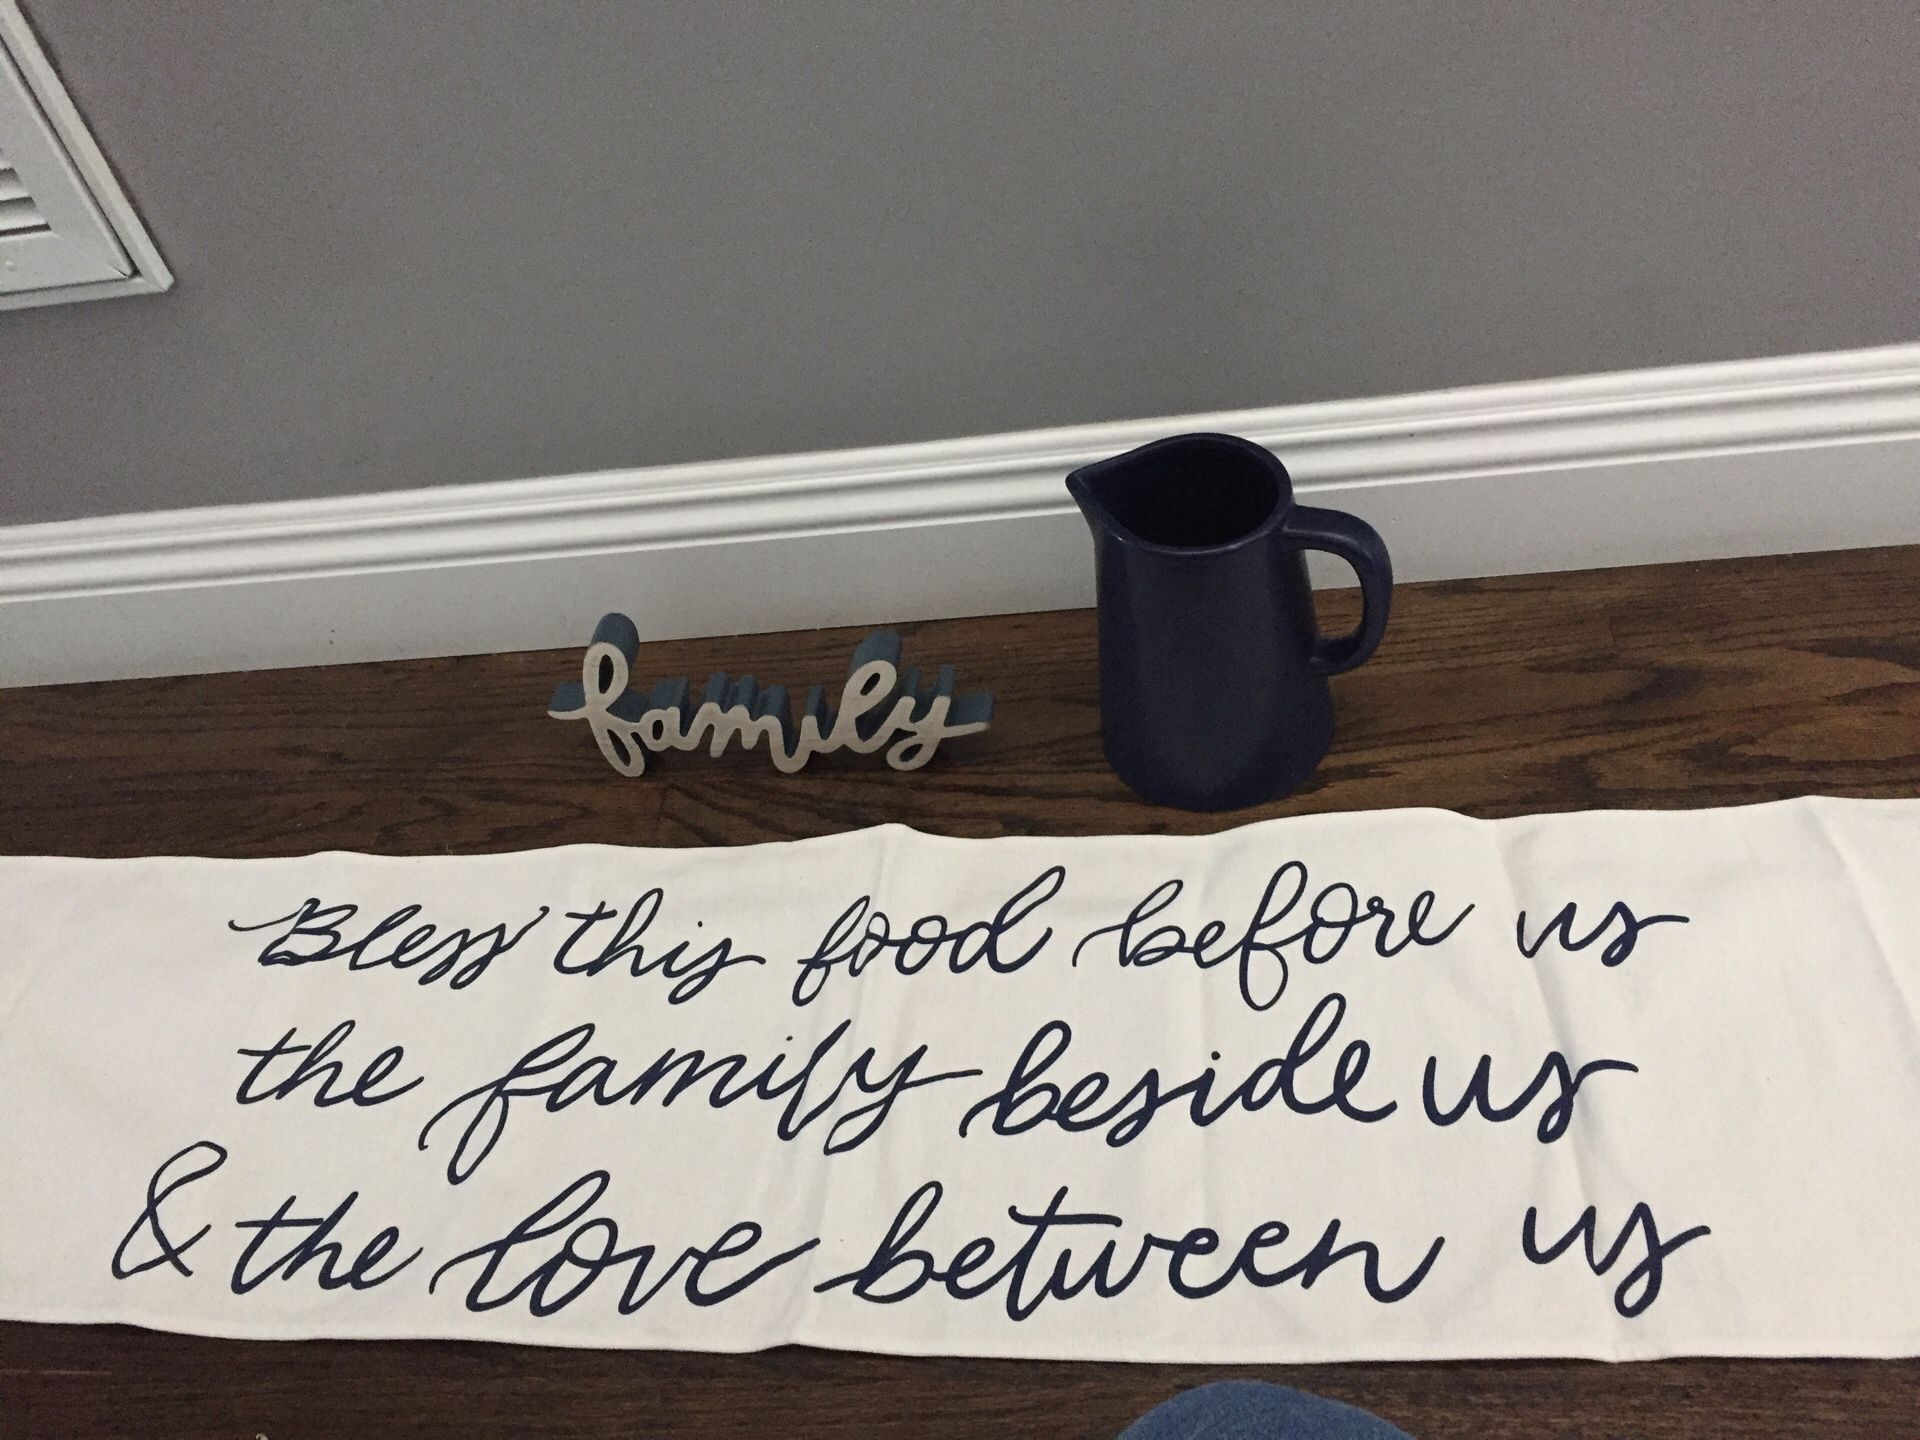 New table runner with wooden family sign and ceramic pitcher